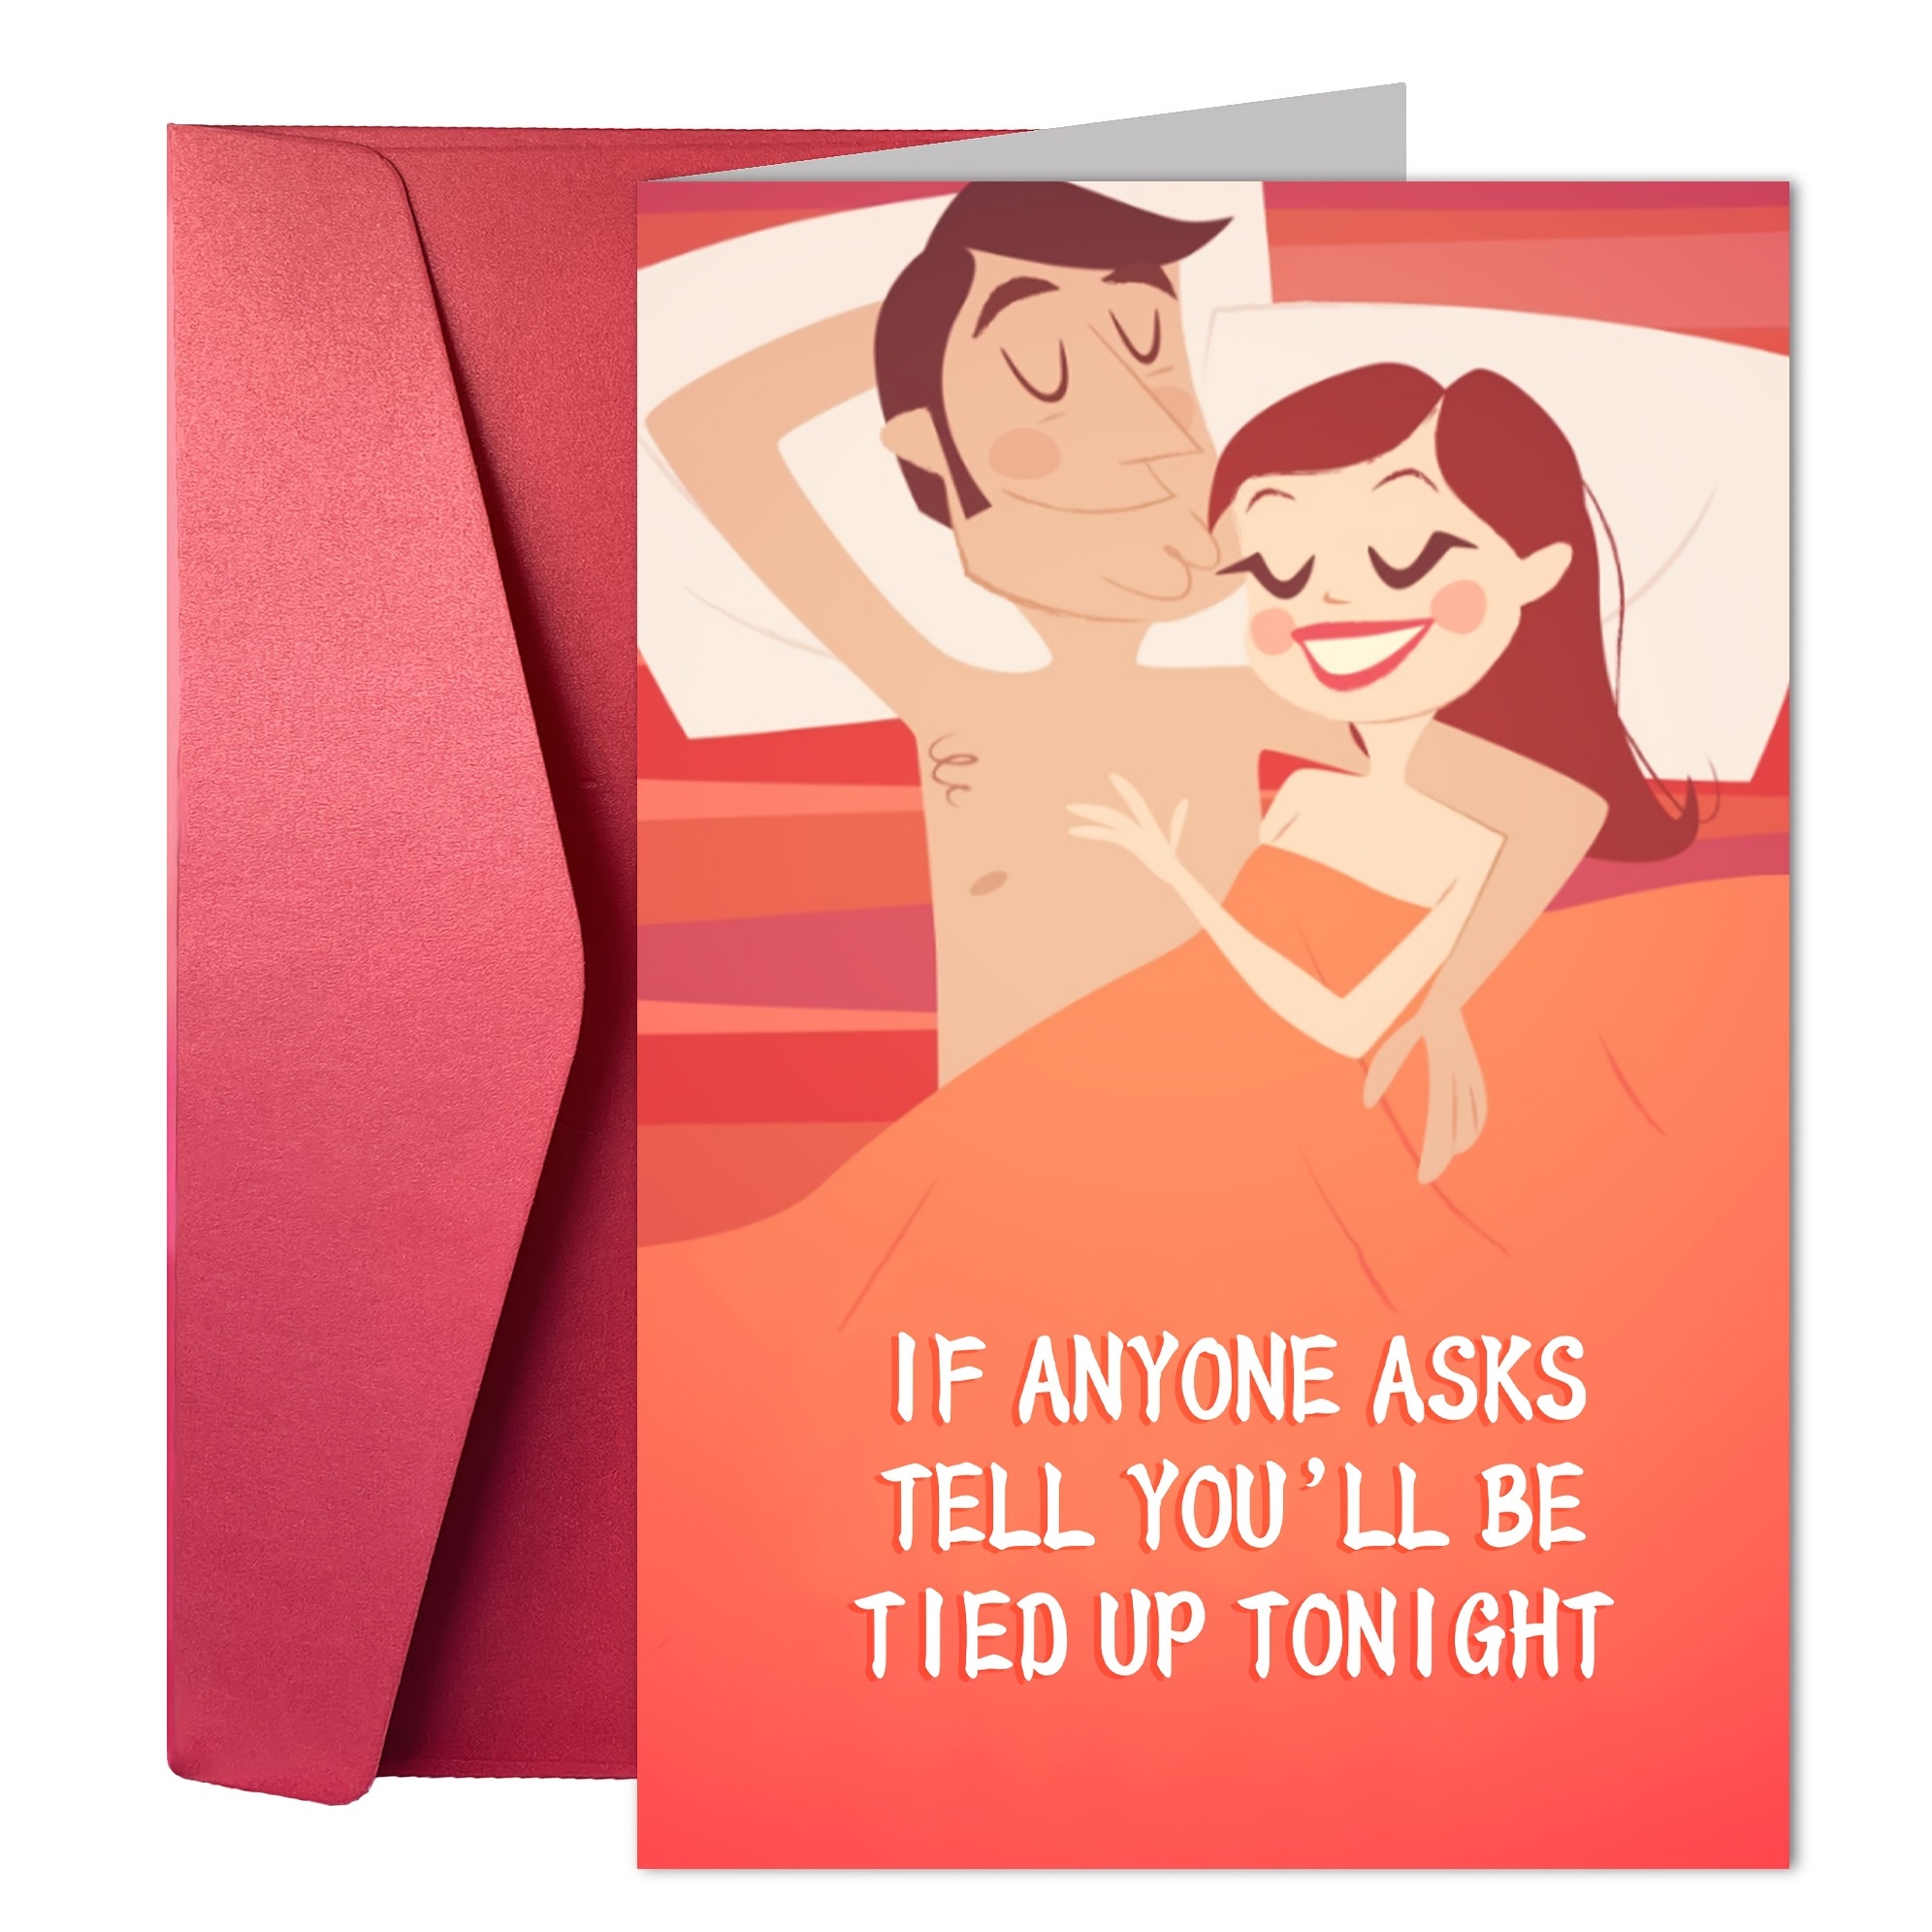 Romantic Anniversary Card For Him/her - Tied Up Tonight - Funny Gift Birthday Cards For Husband/wife/man/woman/boyfriend/girlfriend image